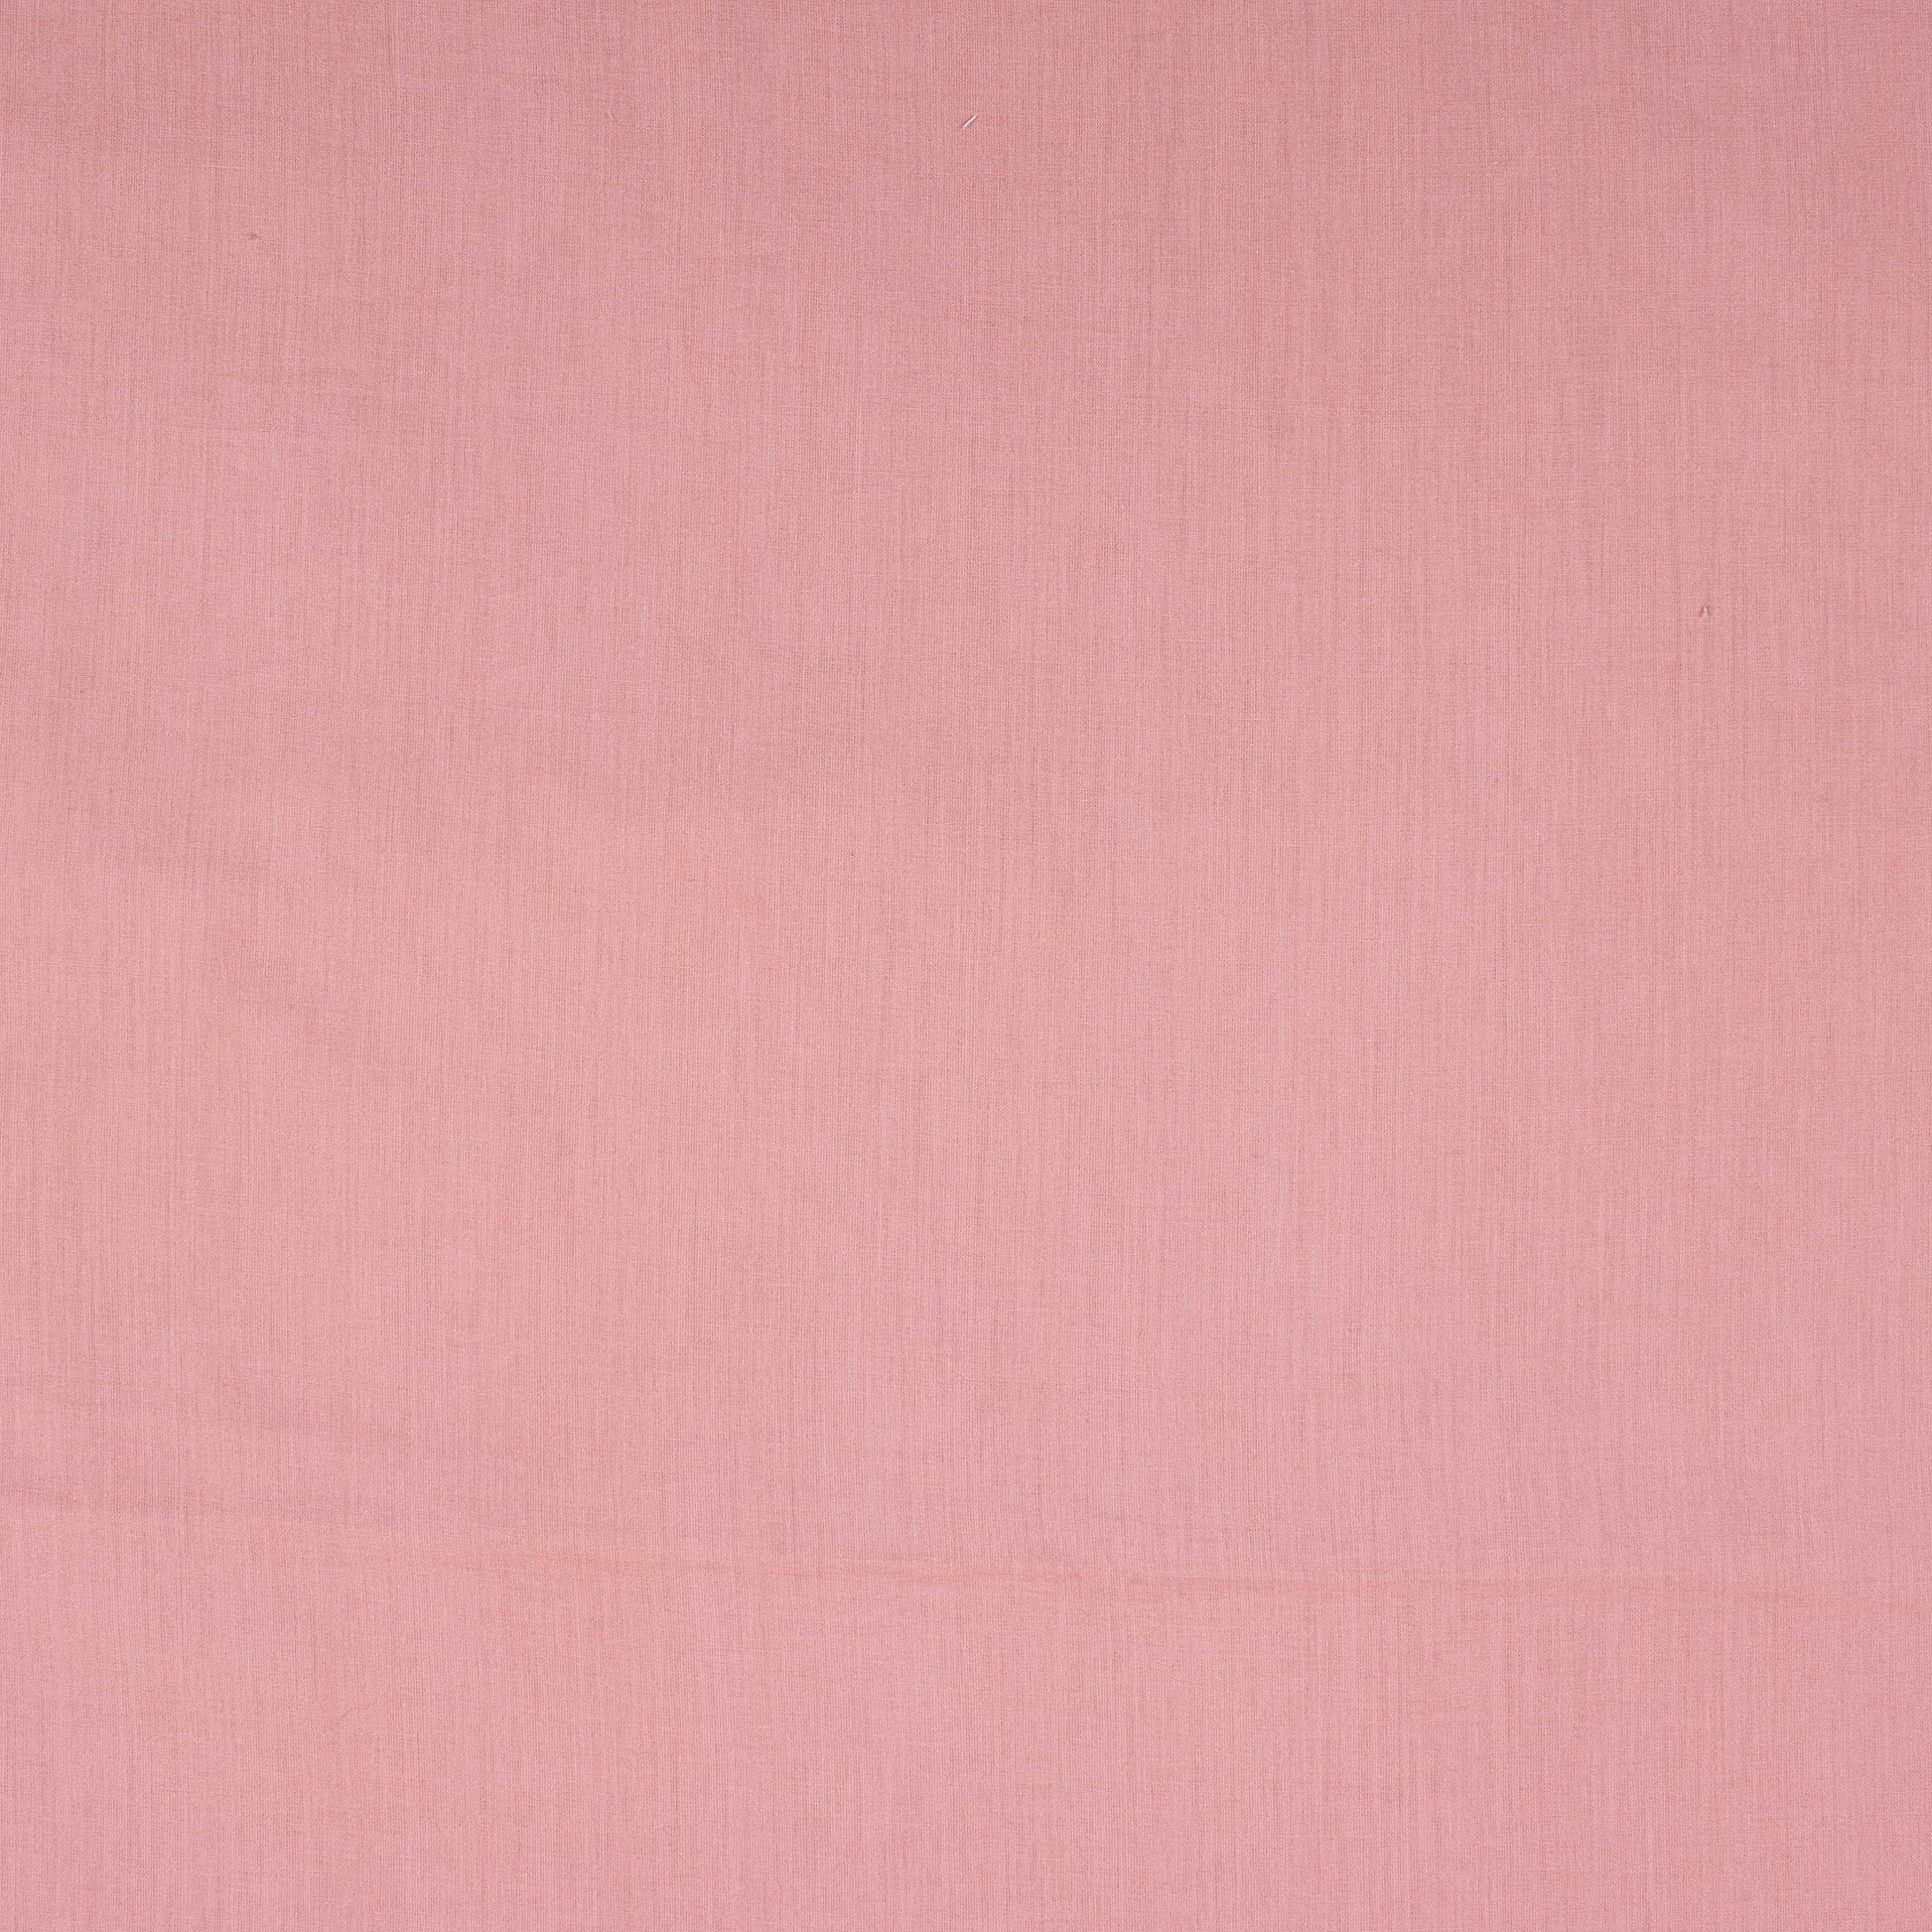 Organic Dyed Solid Plain Cotton Fabric